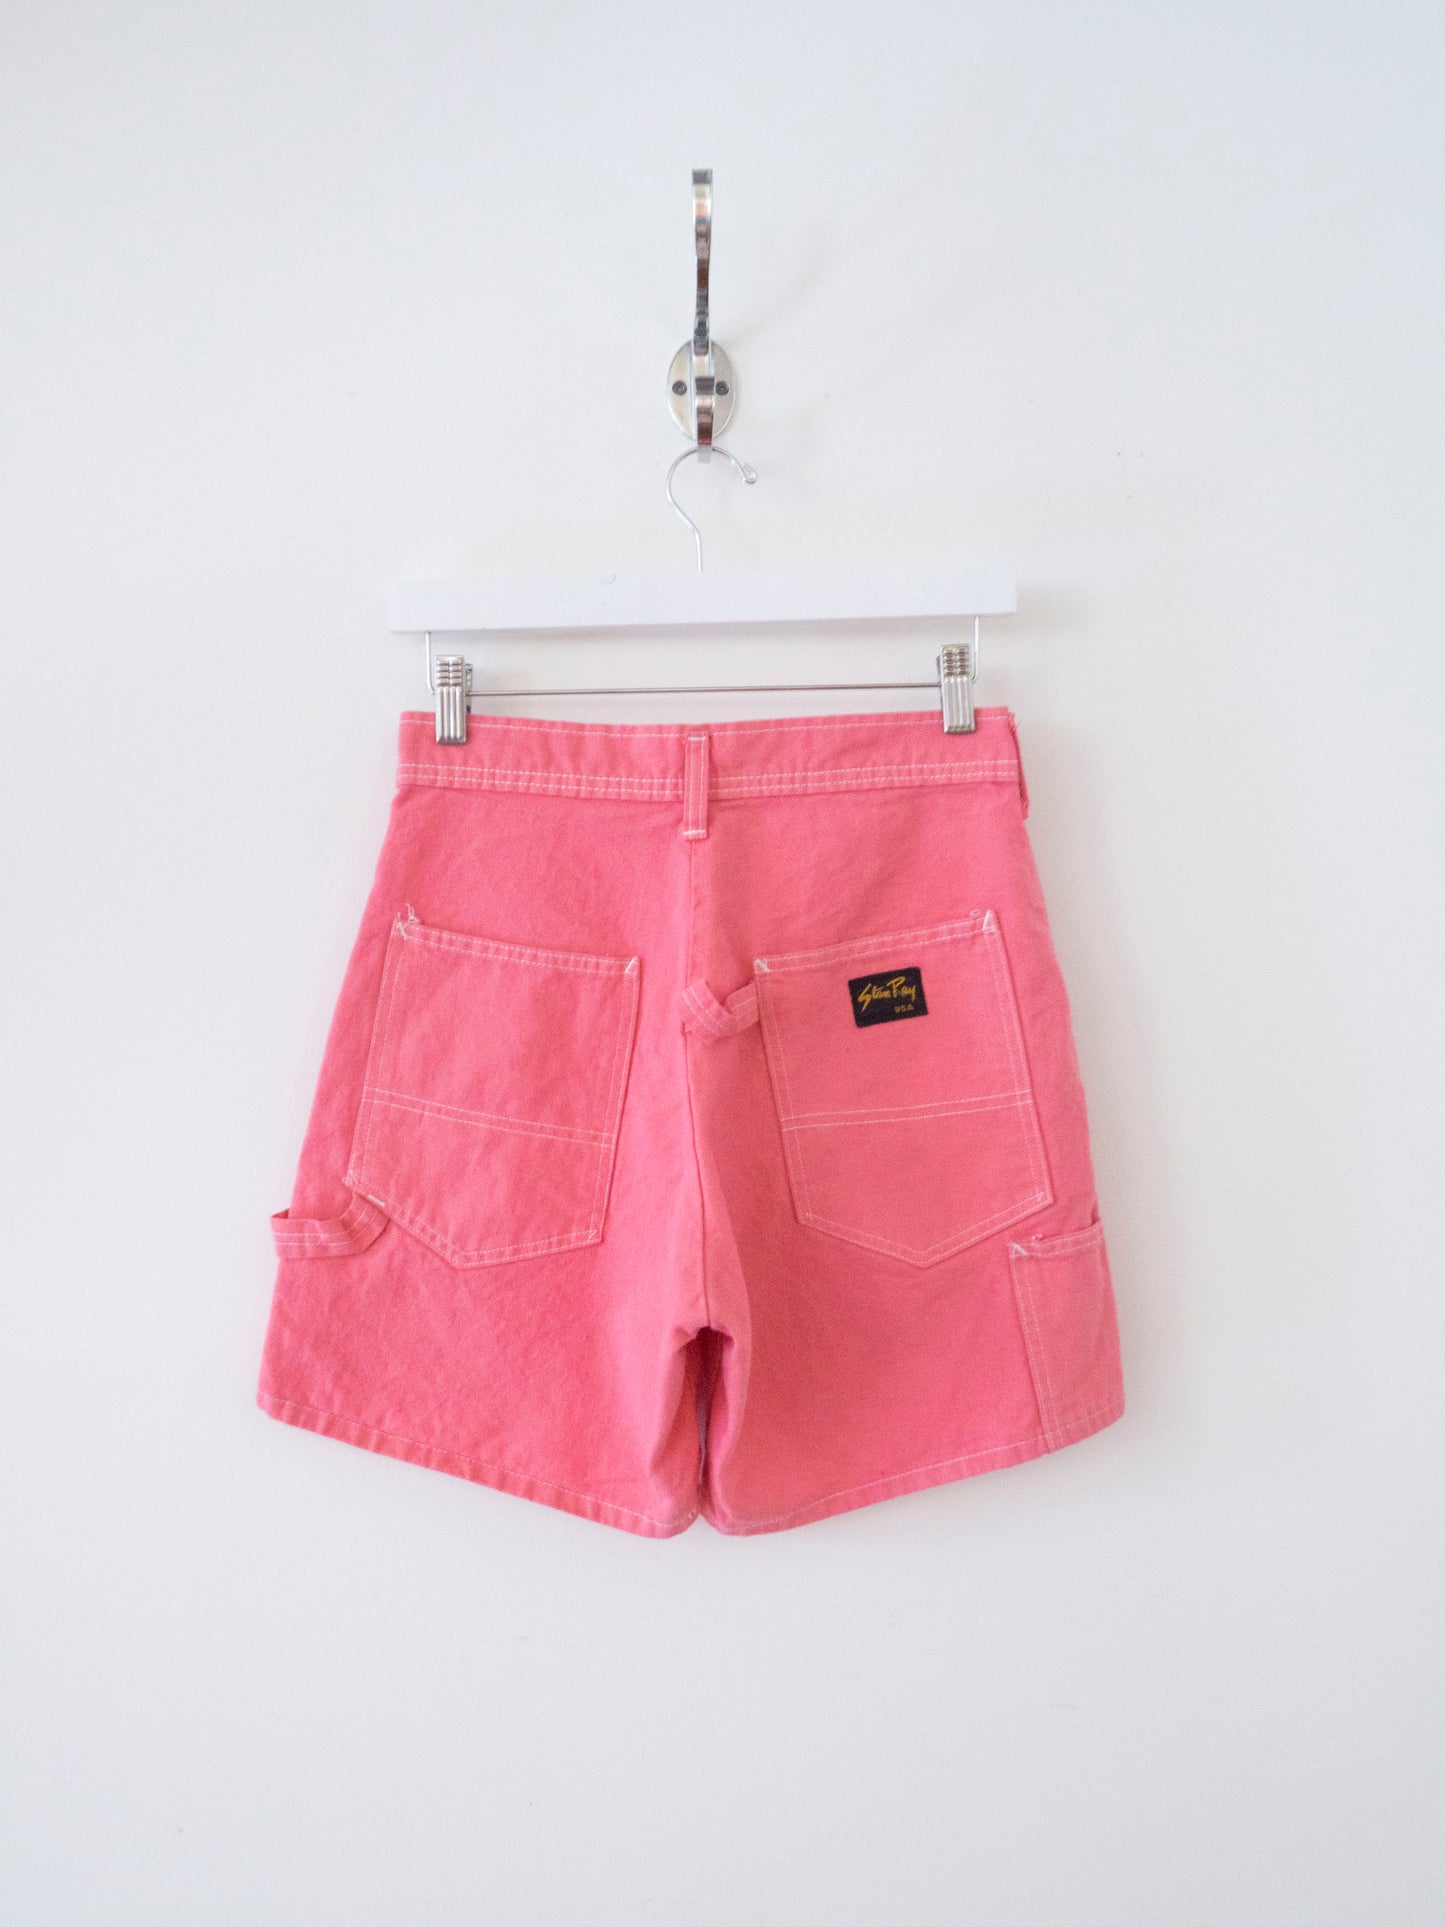 Vintage Stan Ray Shorts - Pink Coral